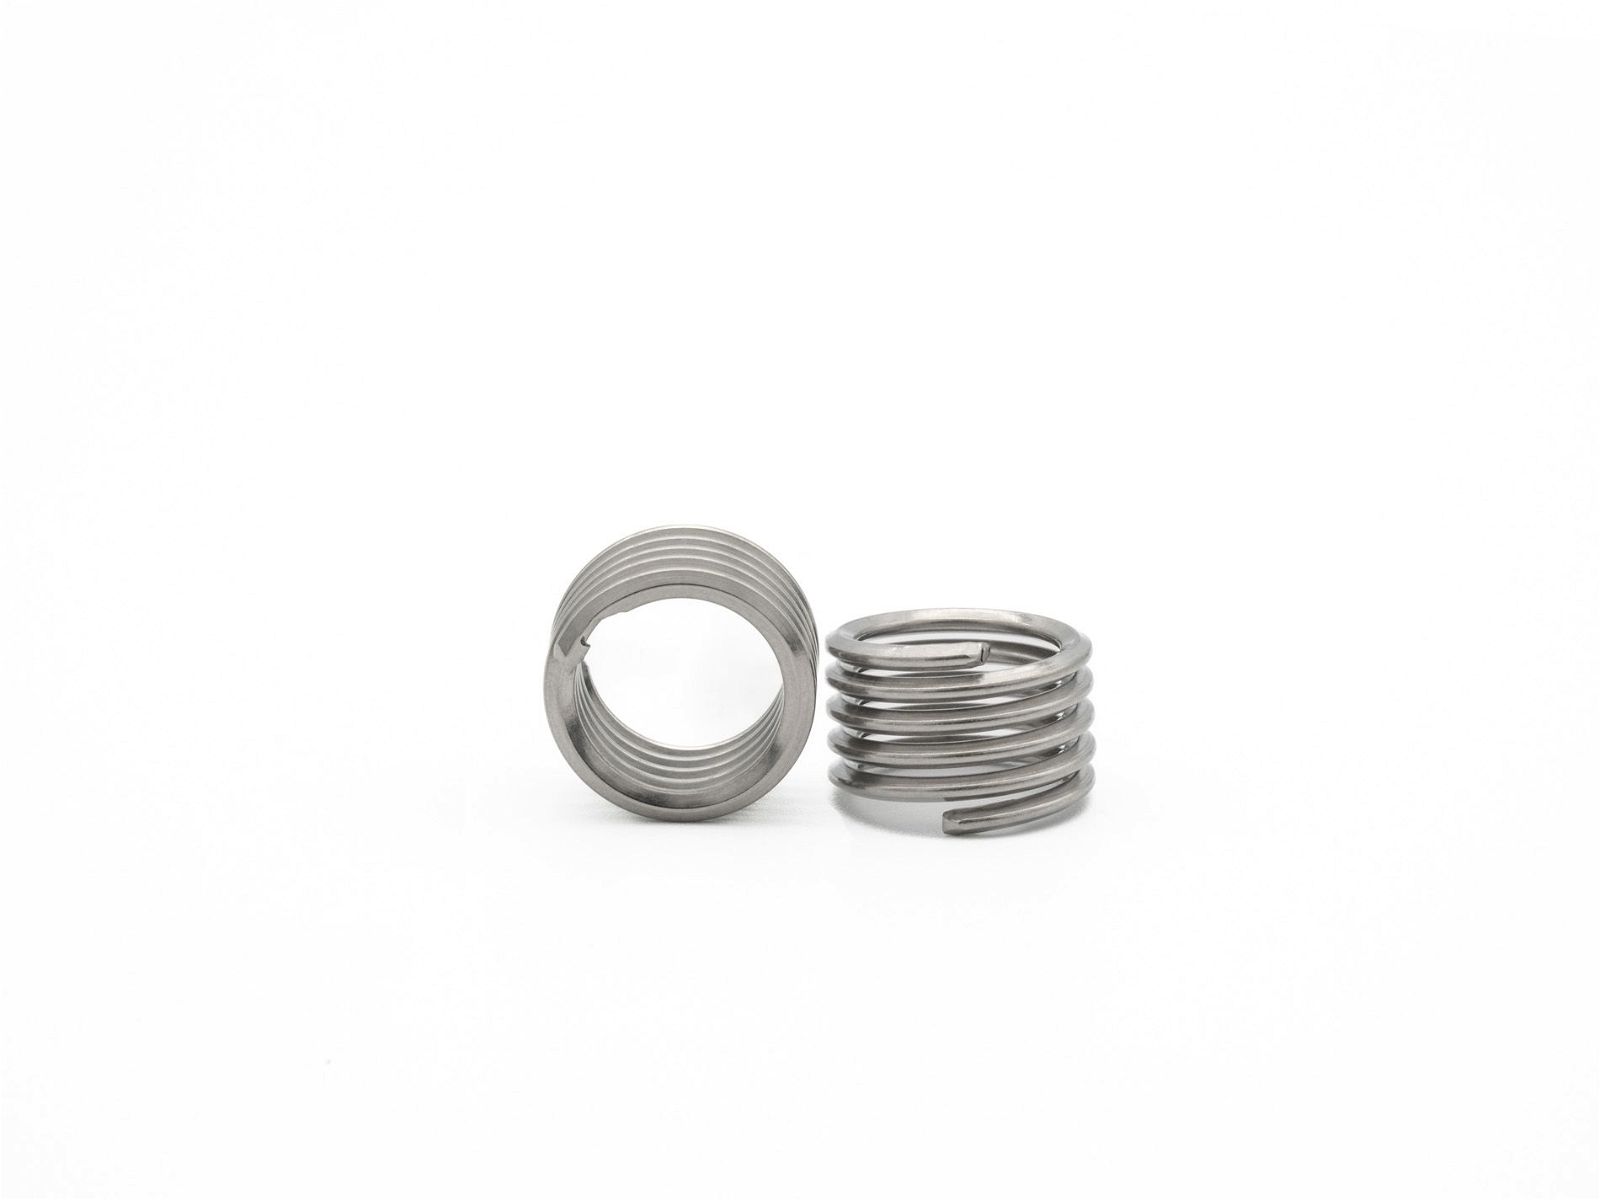 BaerCoil NoTang Wire Thread Inserts M 3 x 0.5 - 2.0 D (6 mm) - 100 pcs.